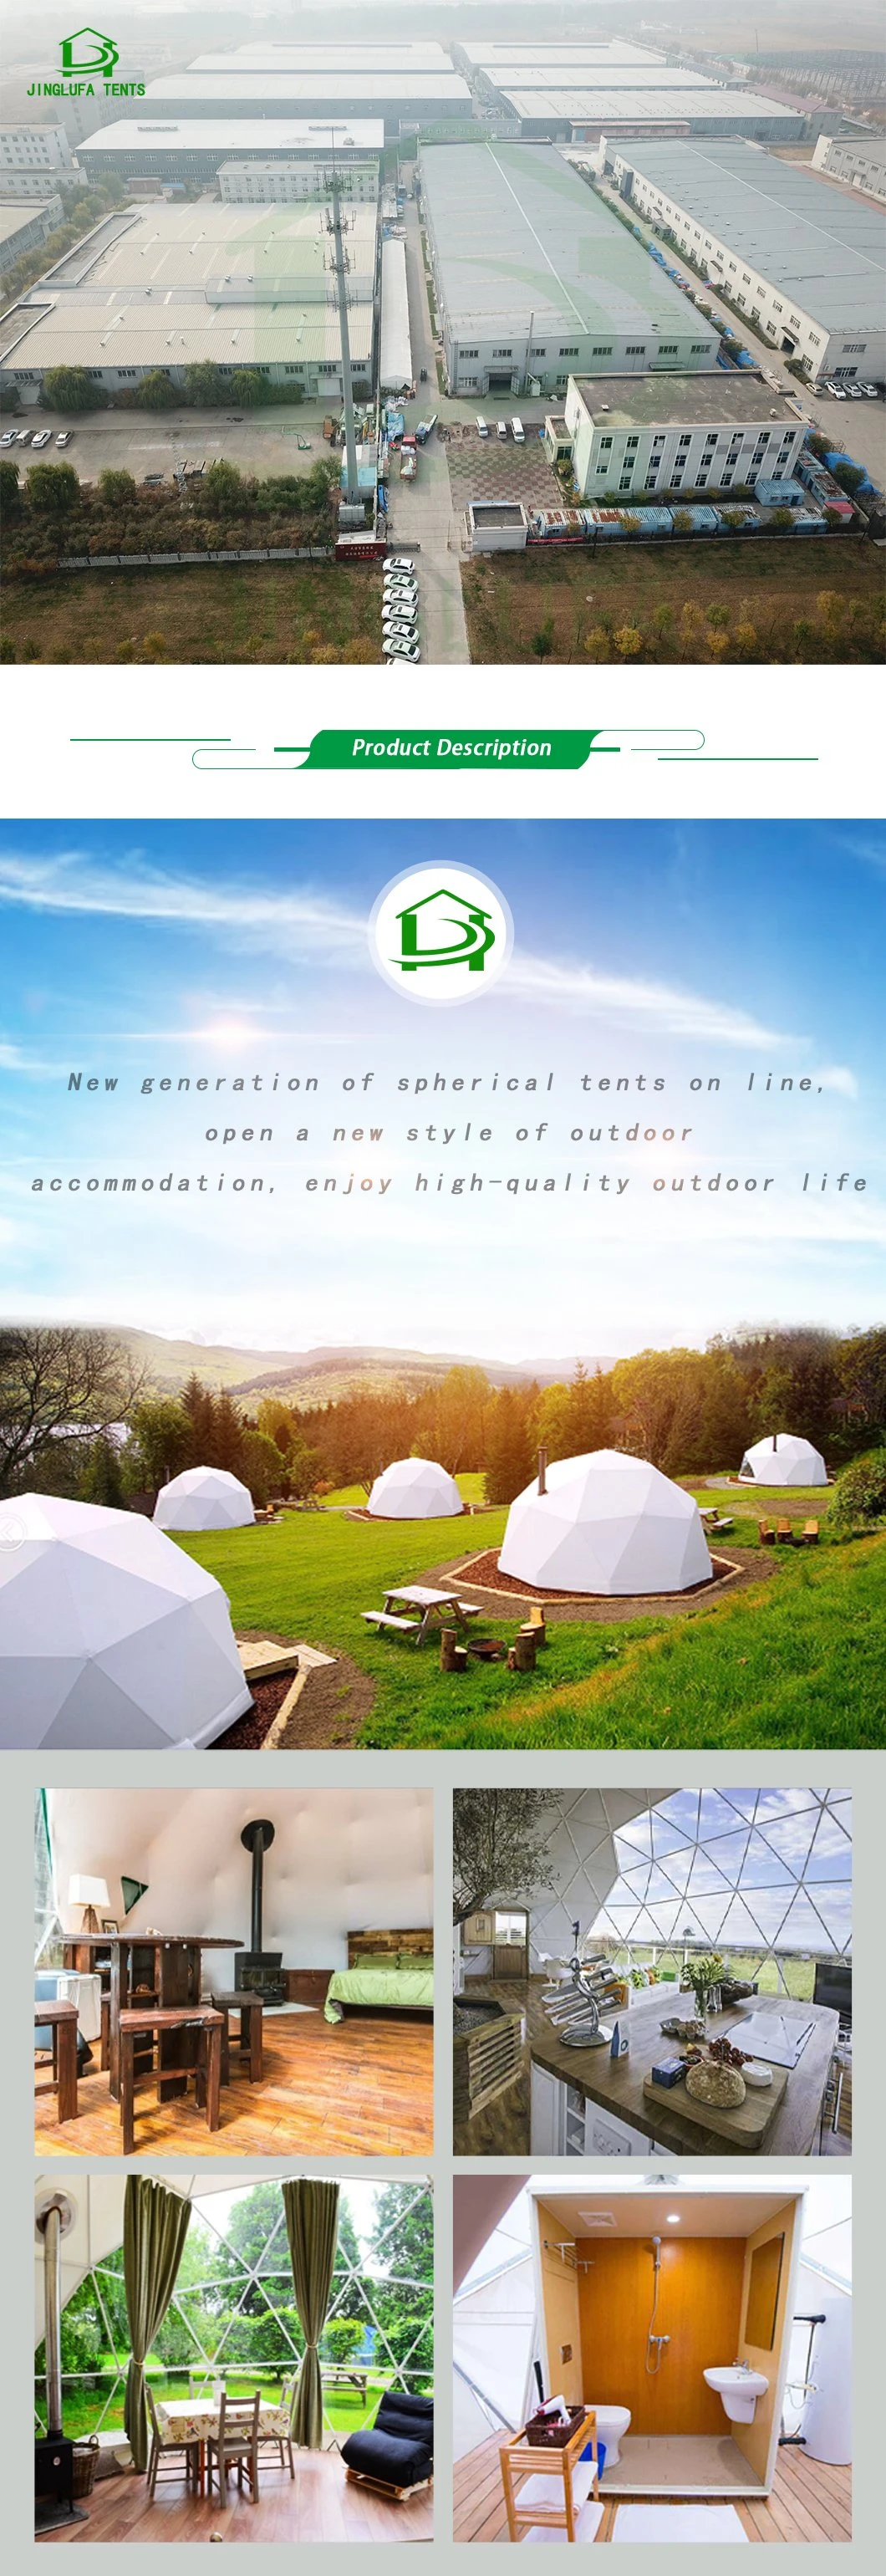 Waterproof UV Resistant Fabric PVC Dome Tents for Sun Shelter